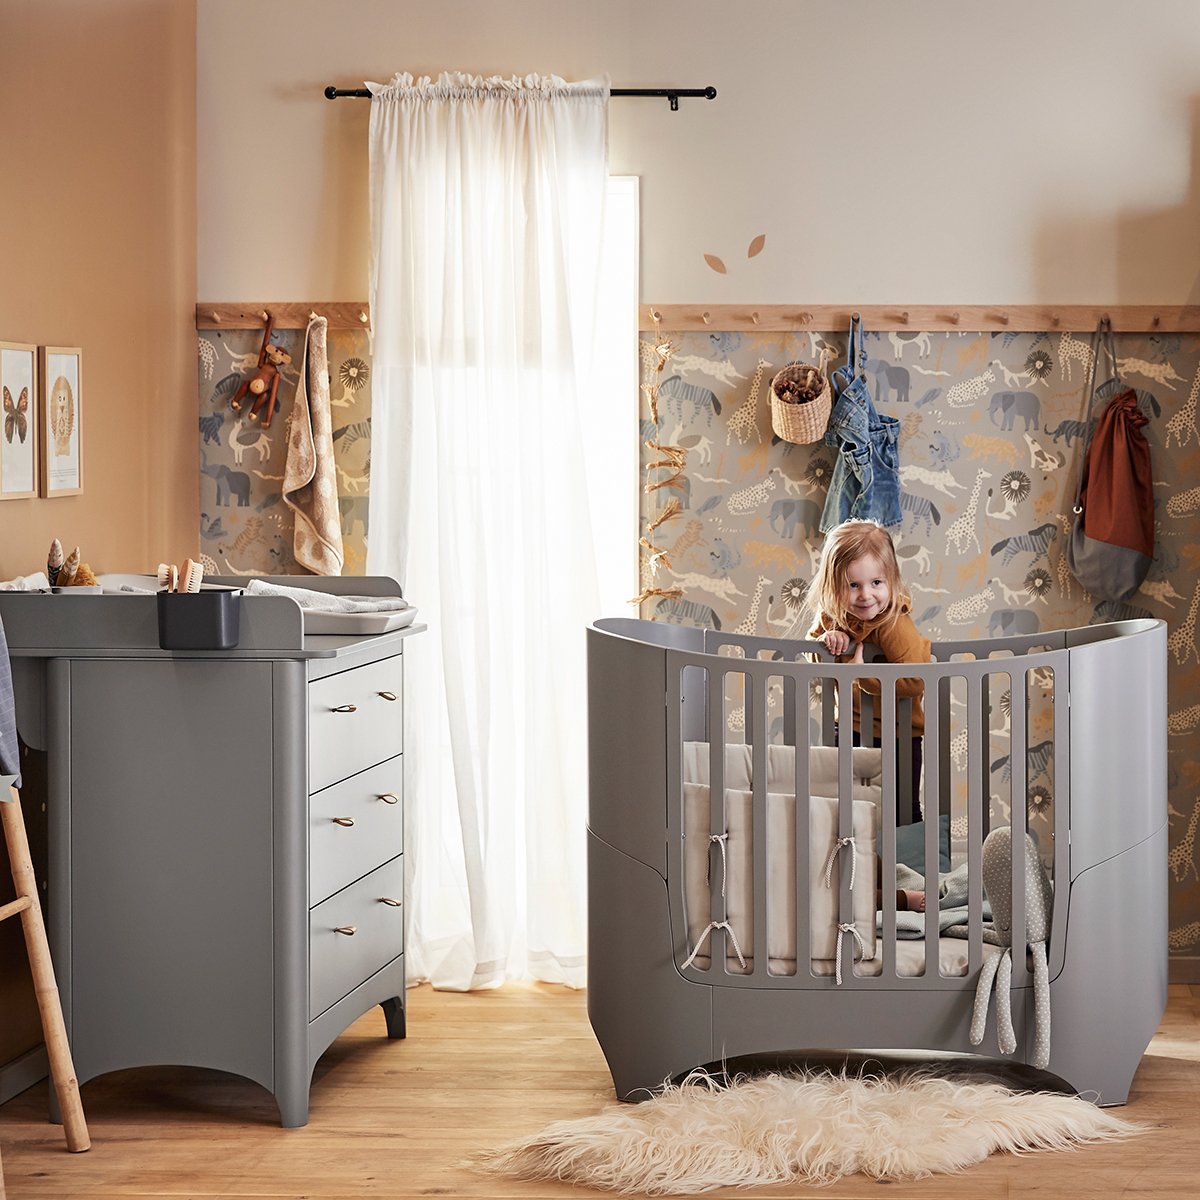 Leander Leander Commode Classic Grey - Decomusy